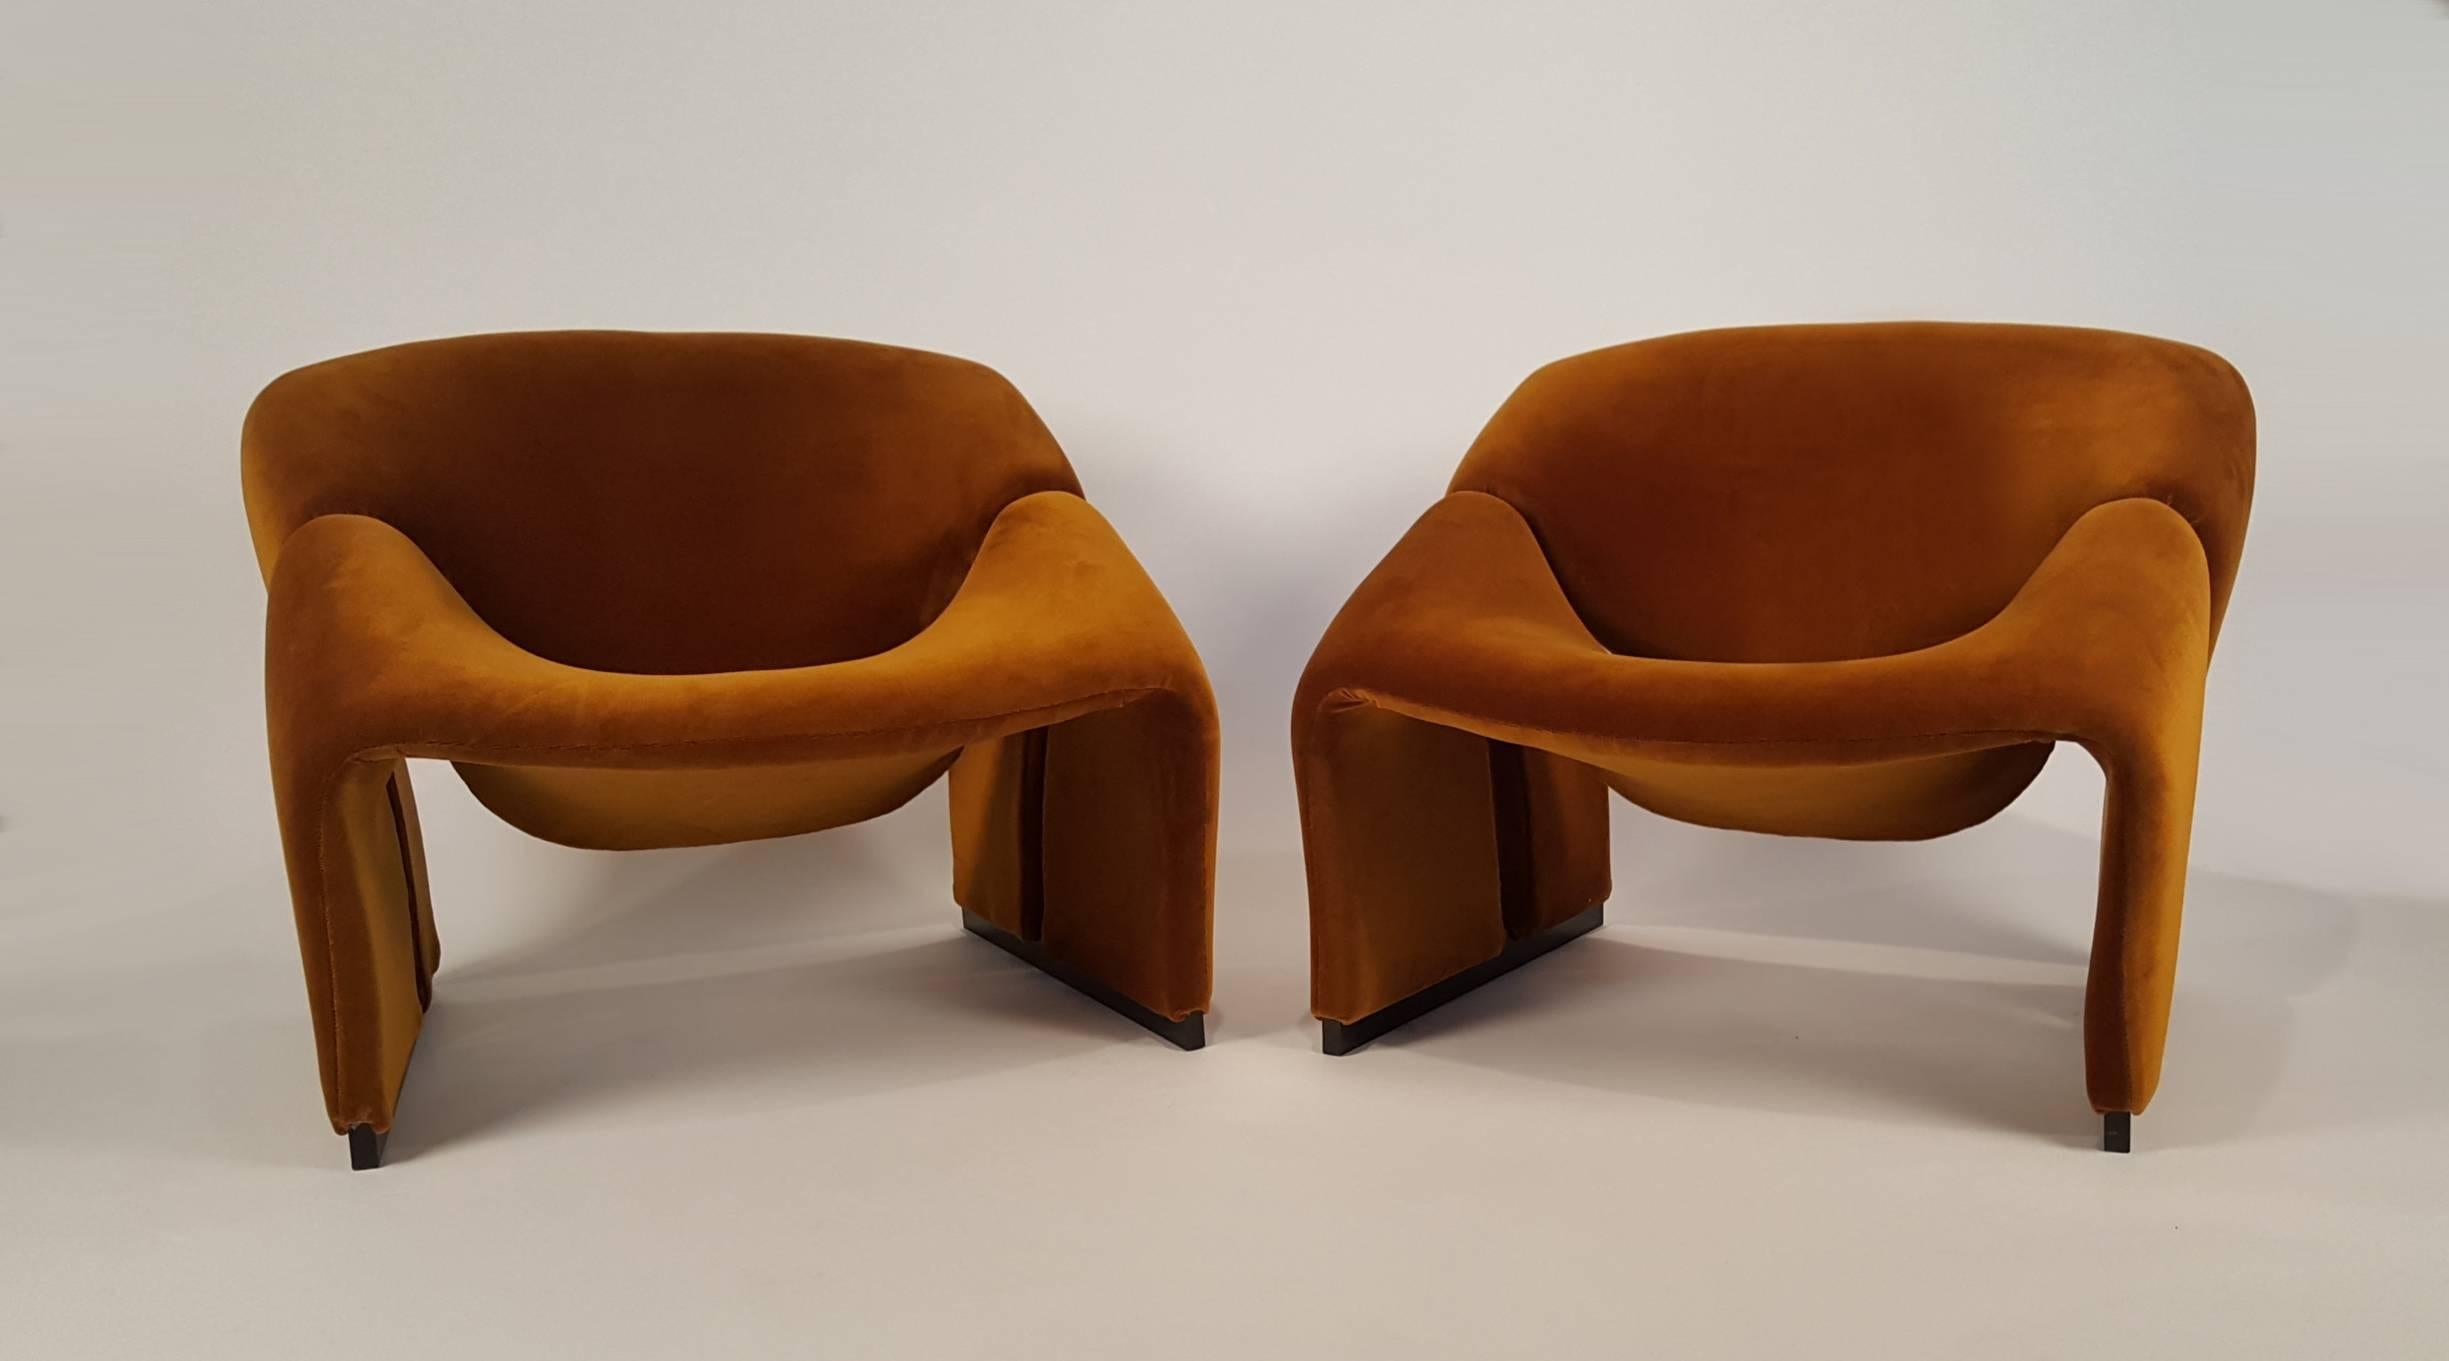 Early pair of French lounge chairs by Pierre Paulin for Artifort.
New velvet upholstery and foam over steel frame. The way that the sculpted ribbons of foam envelop the body is extremely comfortable.